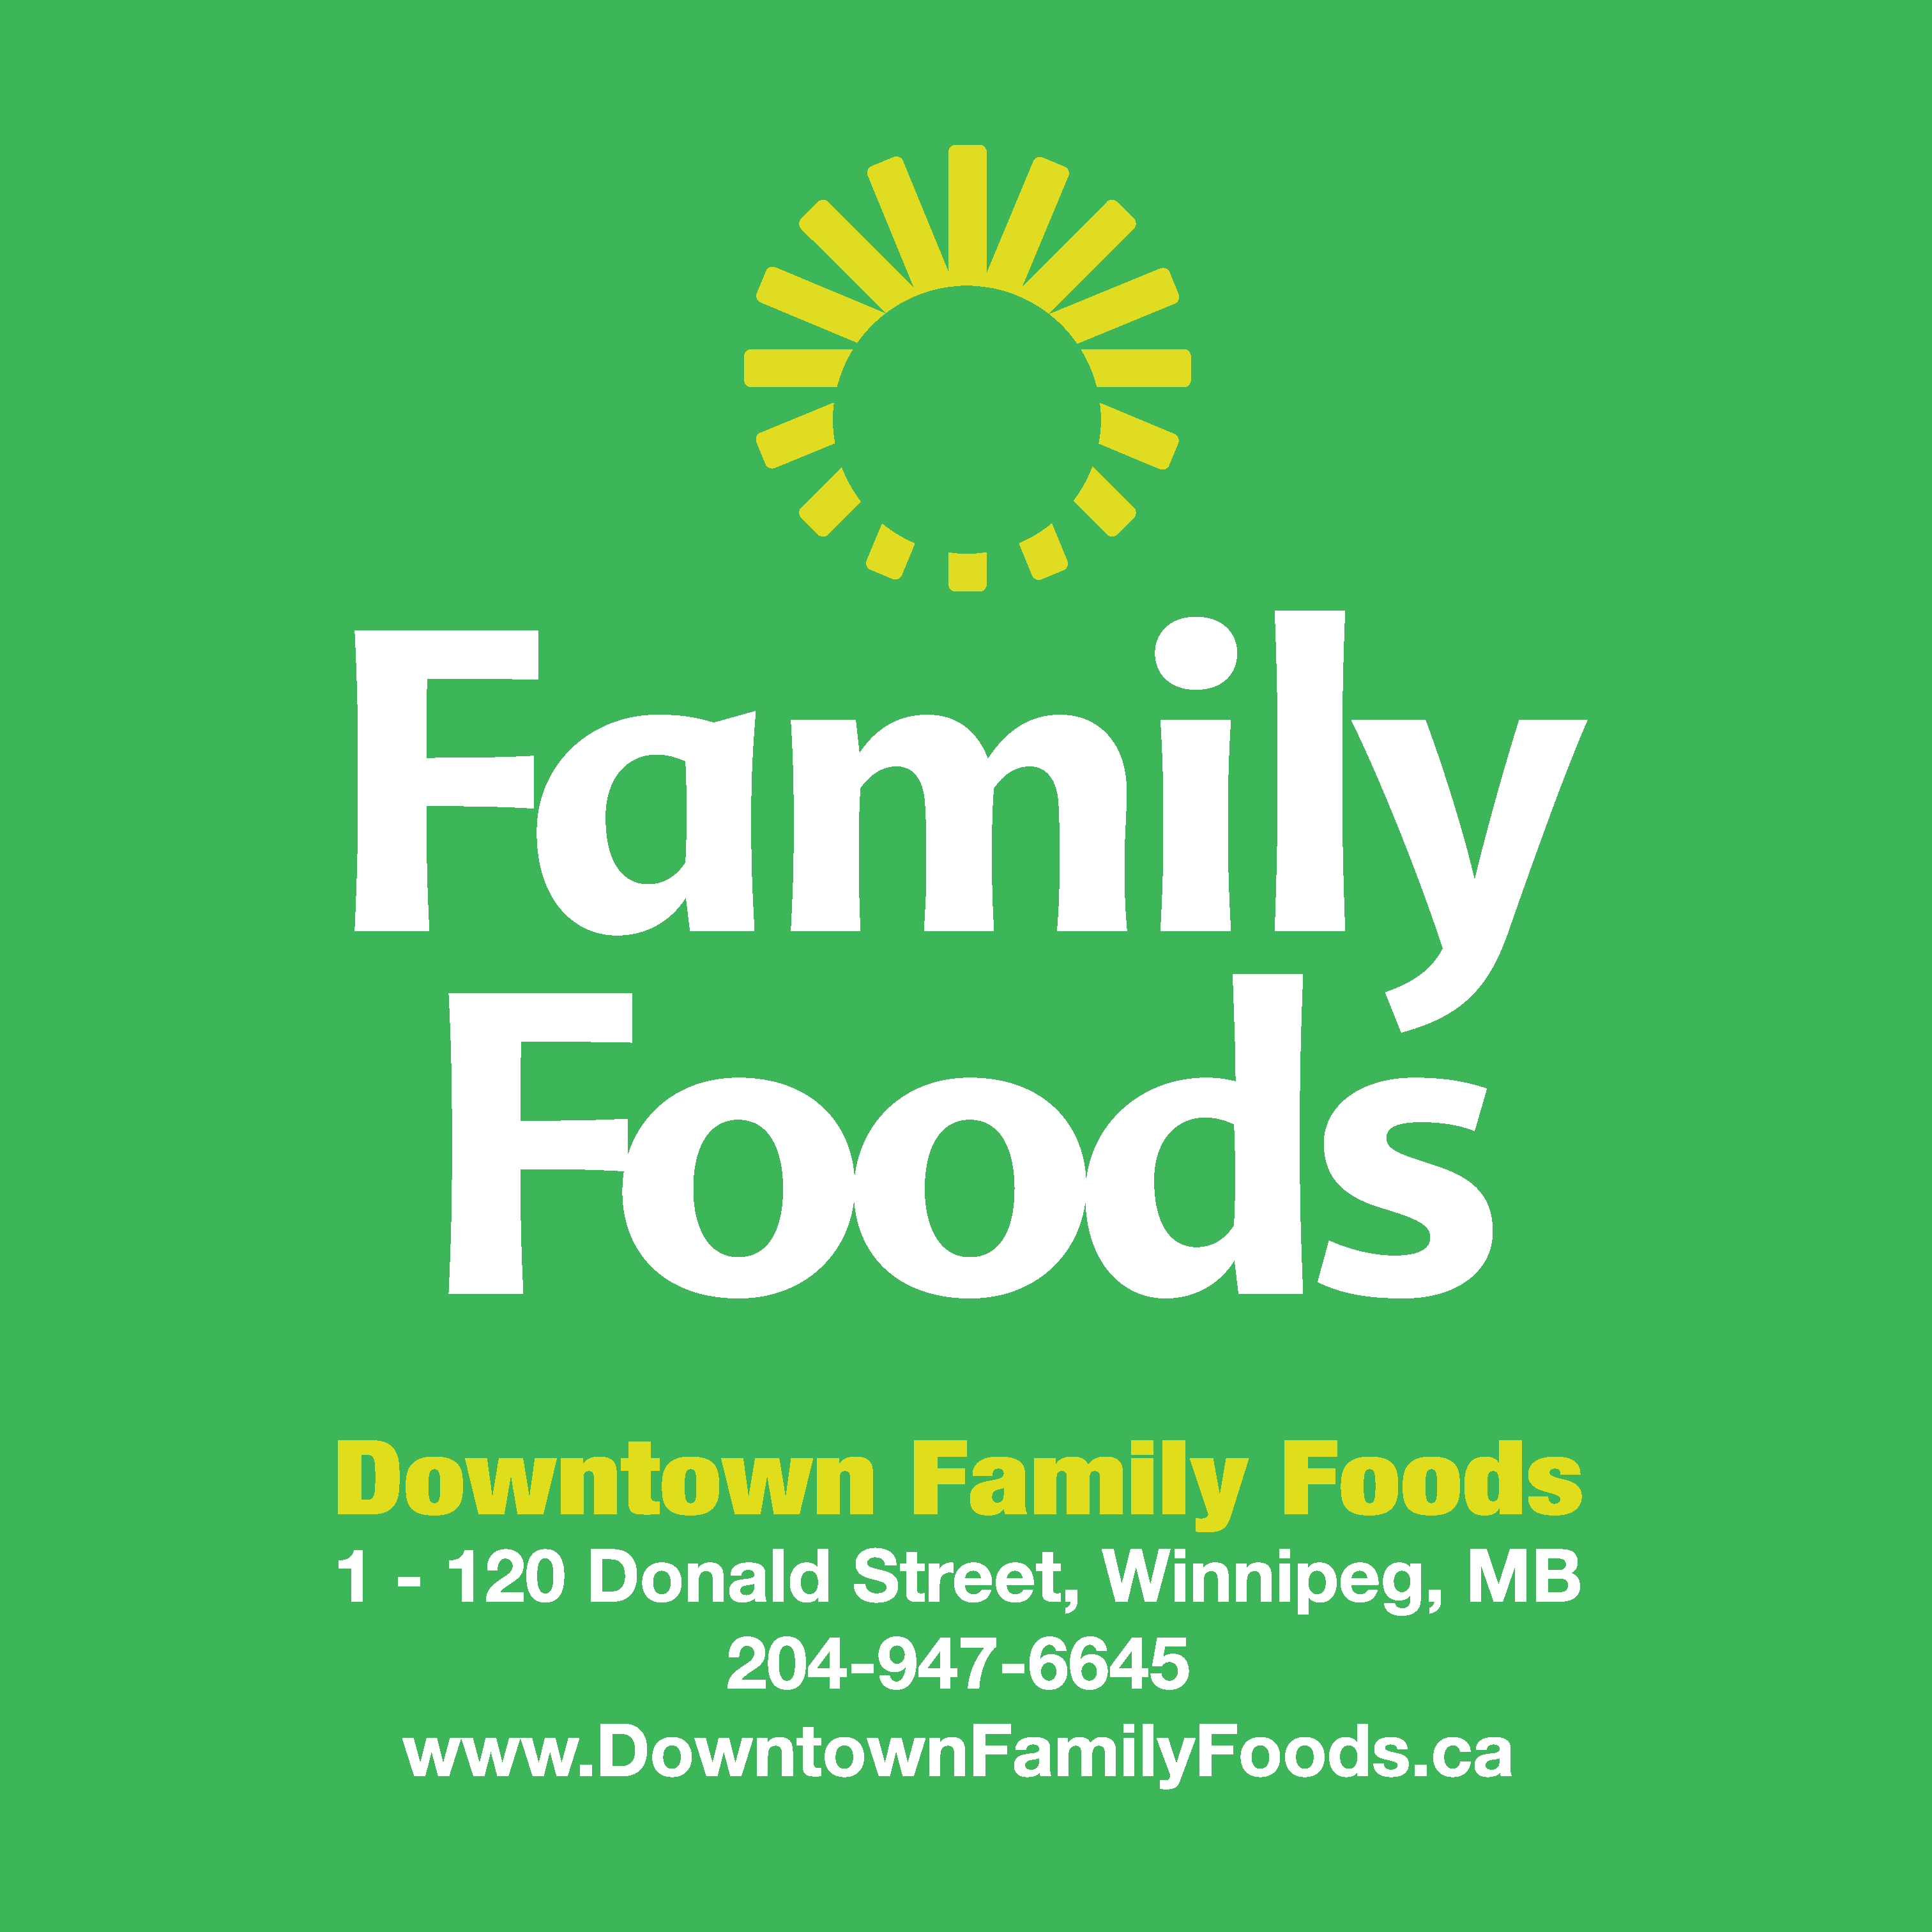 Downtown Family Foods